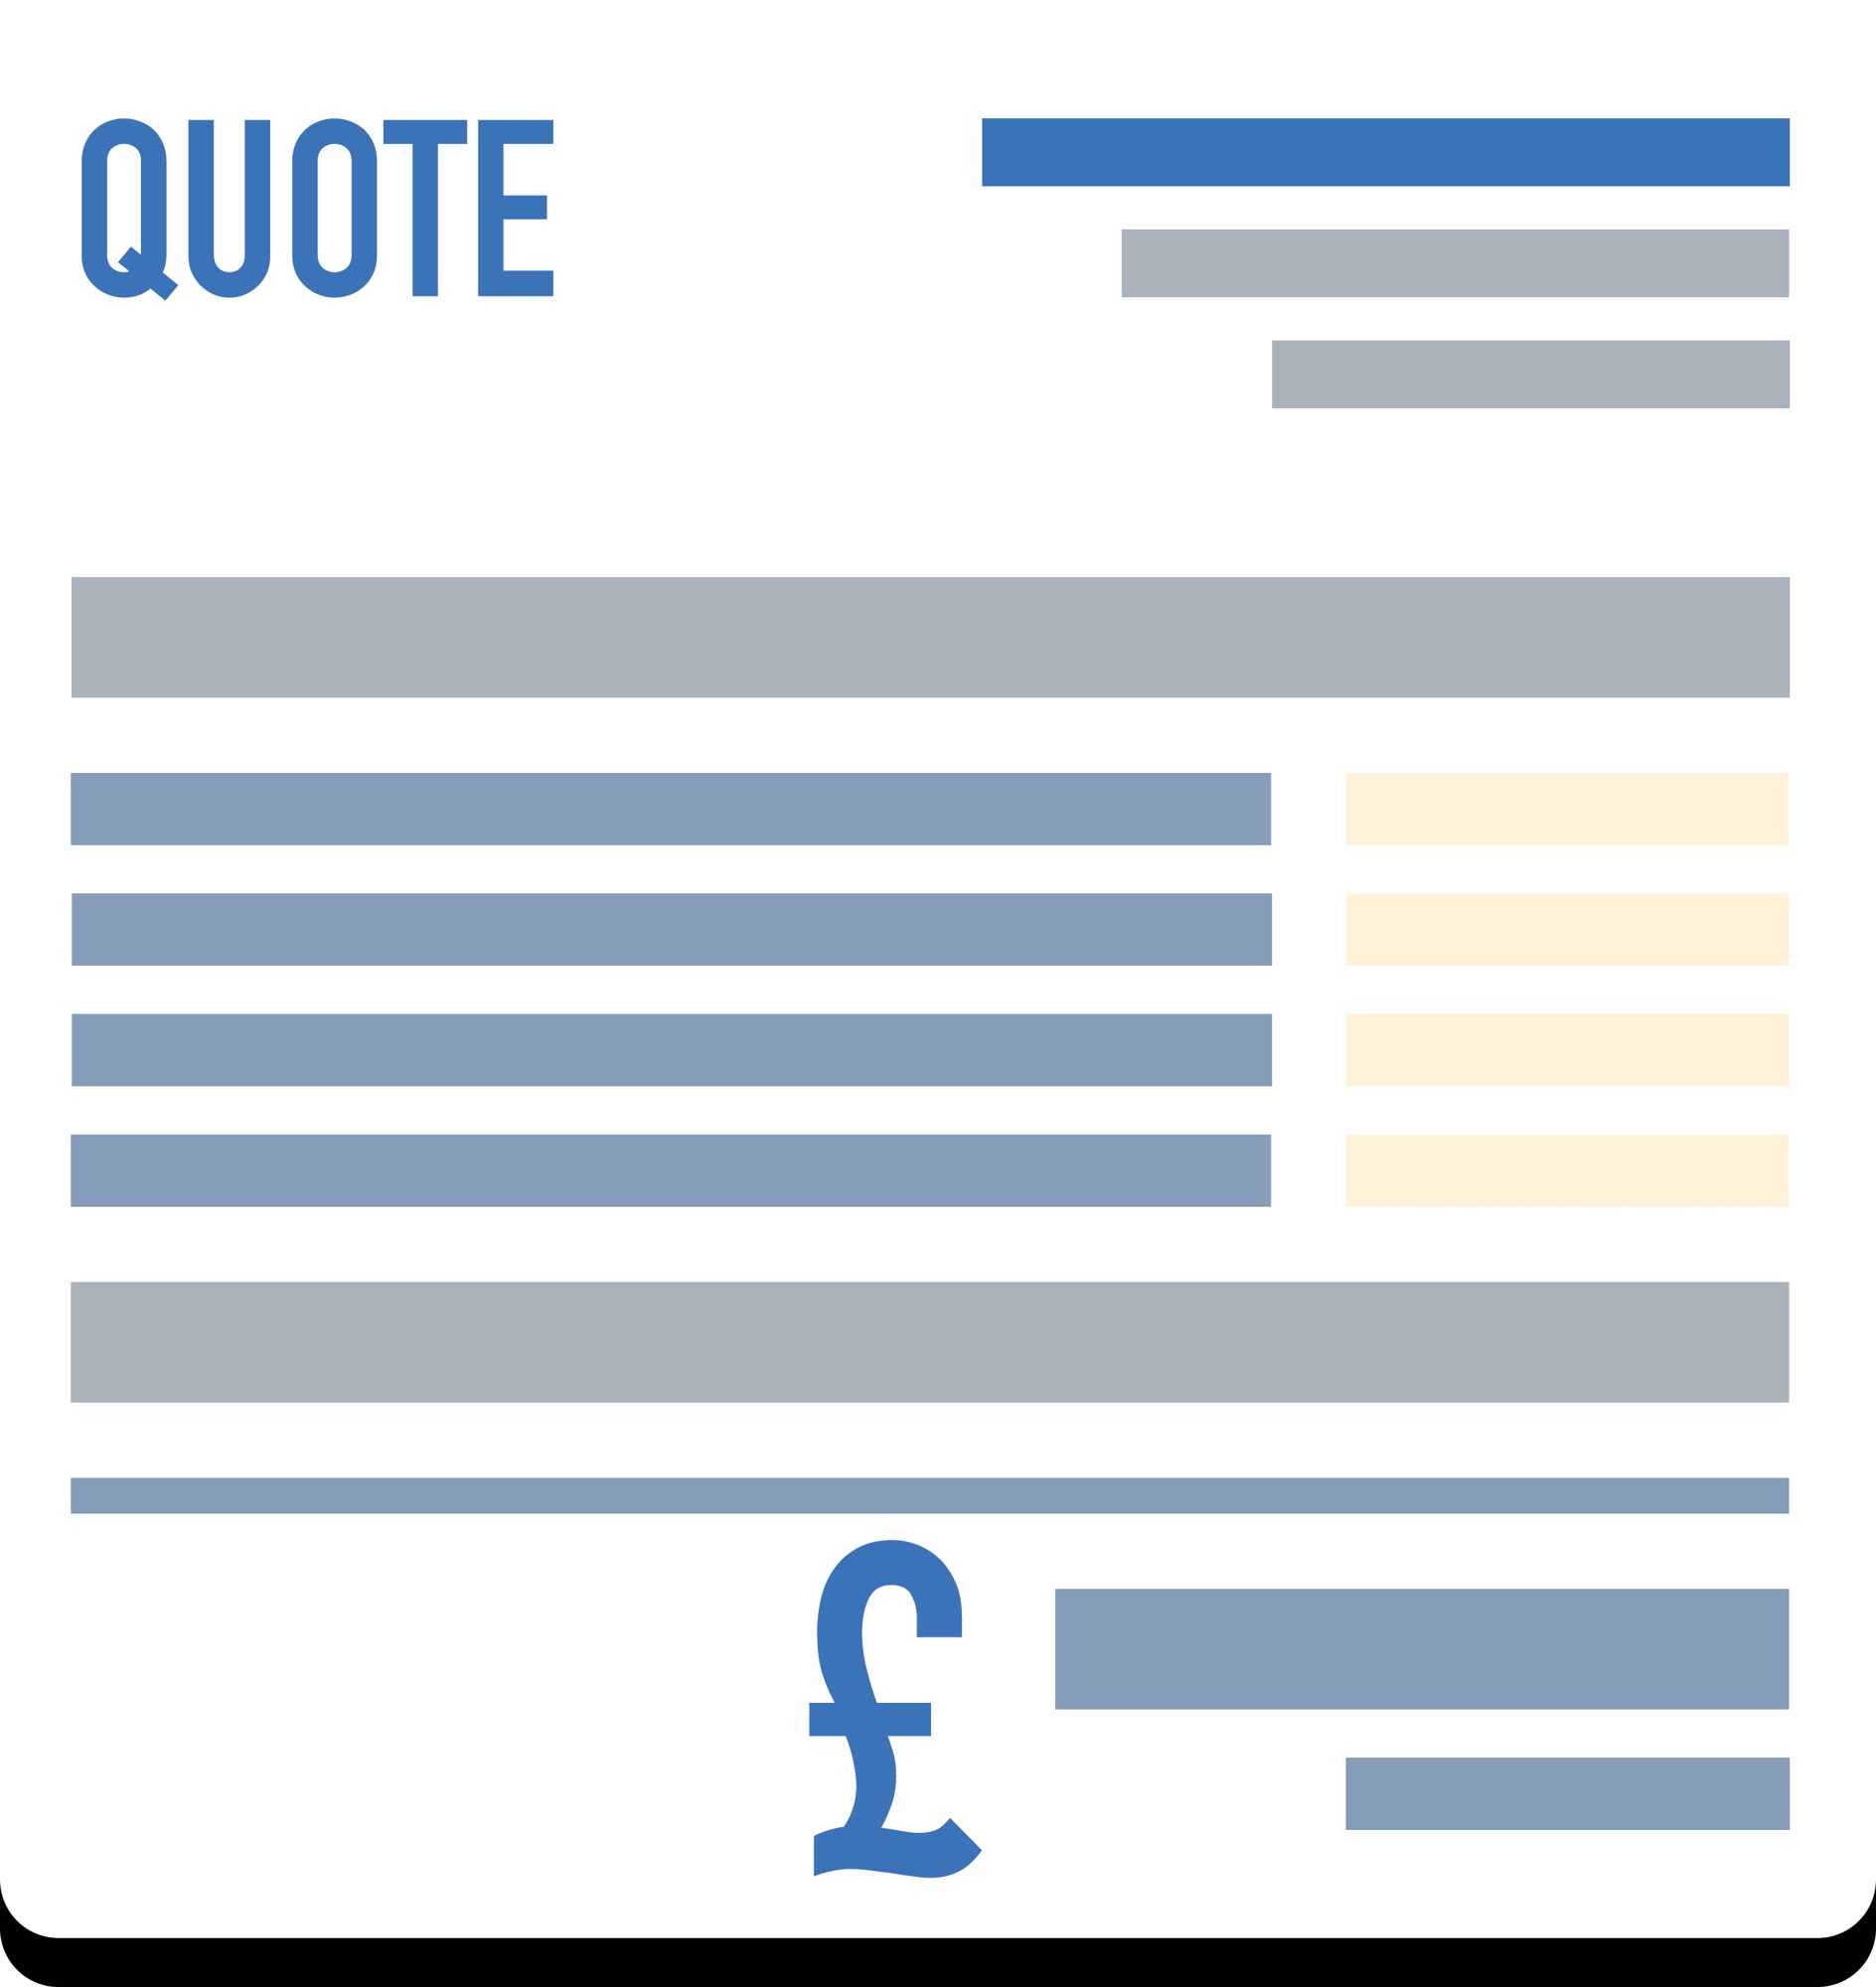 Quote template for a Tiling Company